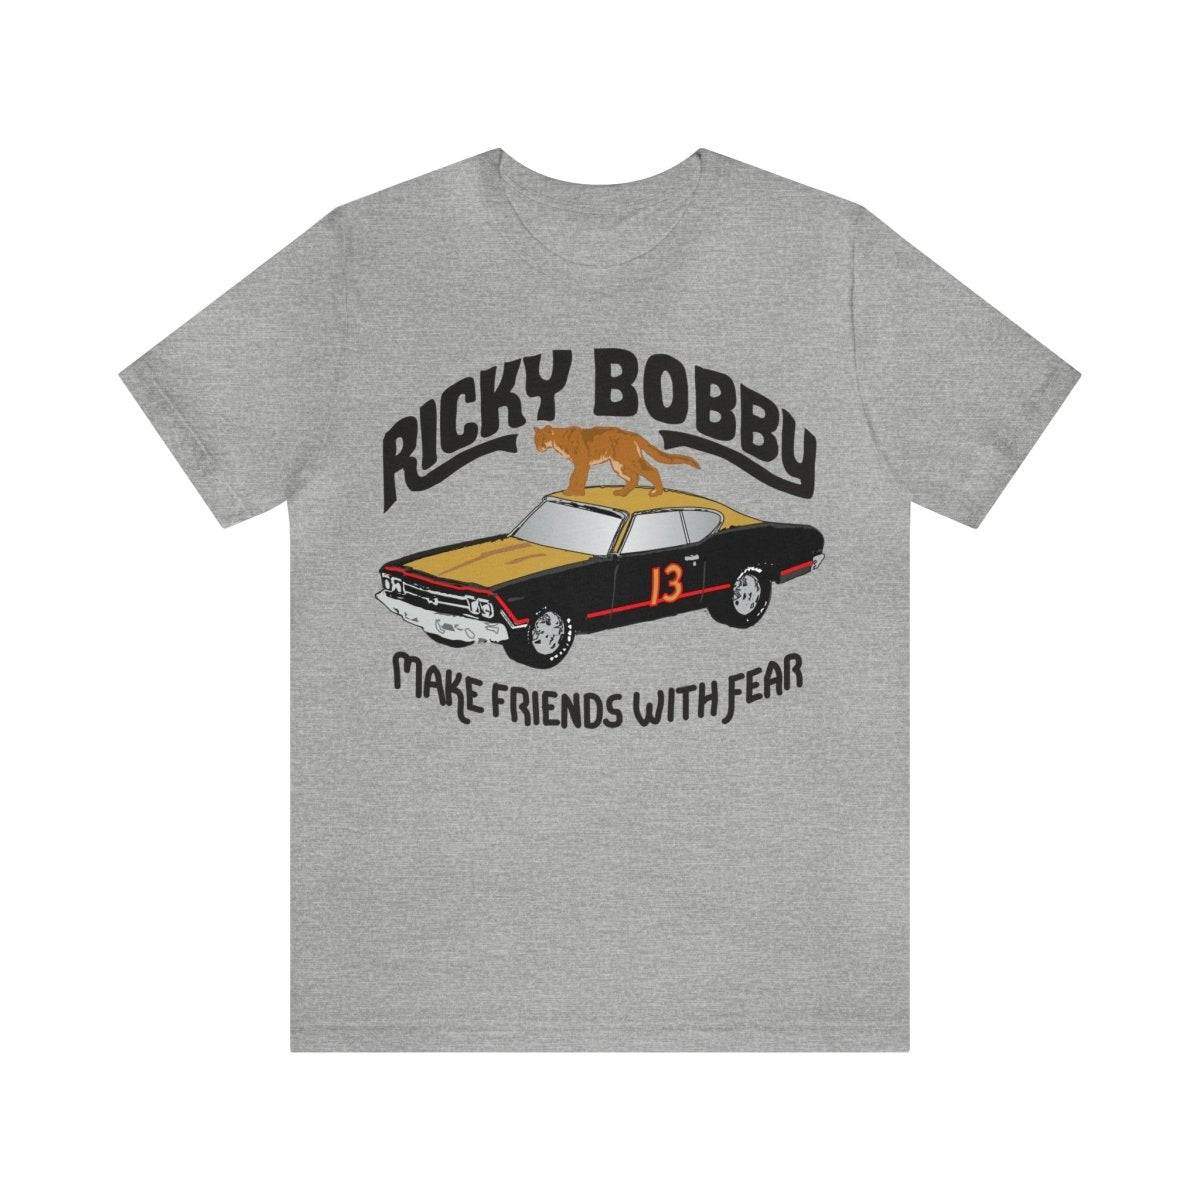 Ricky Bobby Cougar Test Car Premium T-Shirt, Drive Fearless, Go Fast, Win